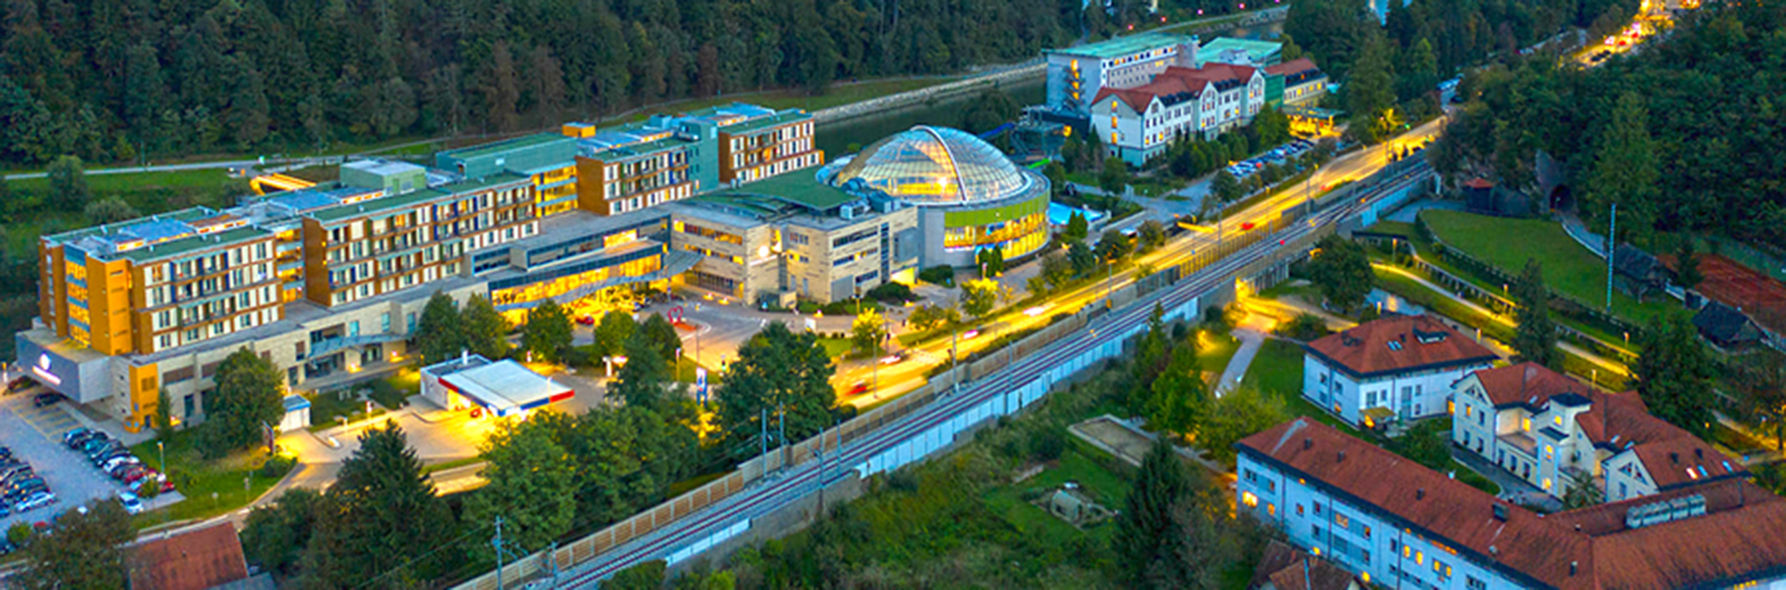 Thermal baths Slovenia, relax in connection with nature